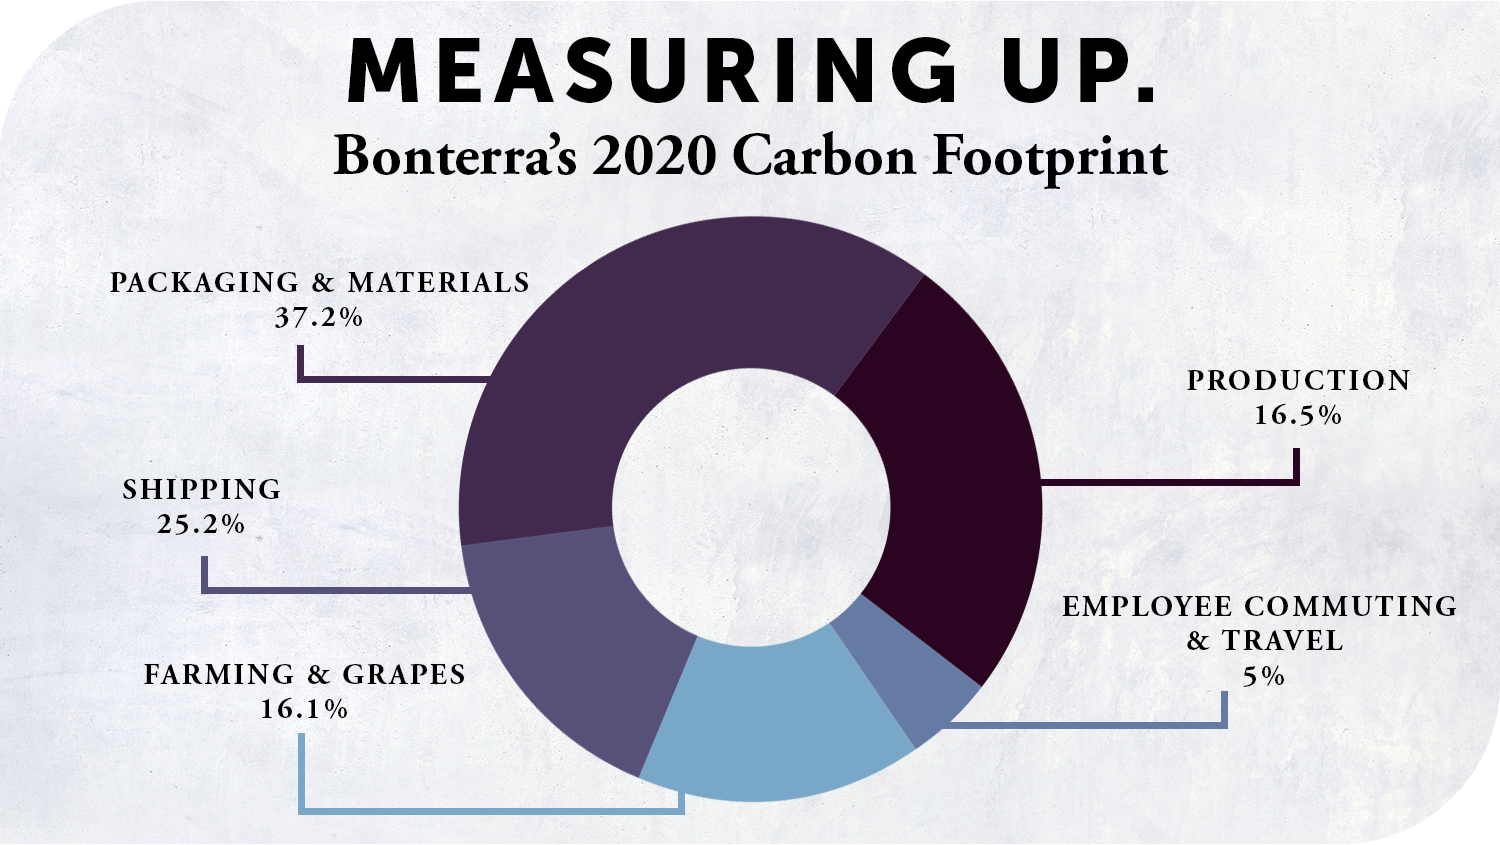 Bonterra worked with nonprofit organization Climate Neutral to account for all scopes of 2020 greenhouse gas emissions created in Bonterra wines’ journey, from cradle to consumer.